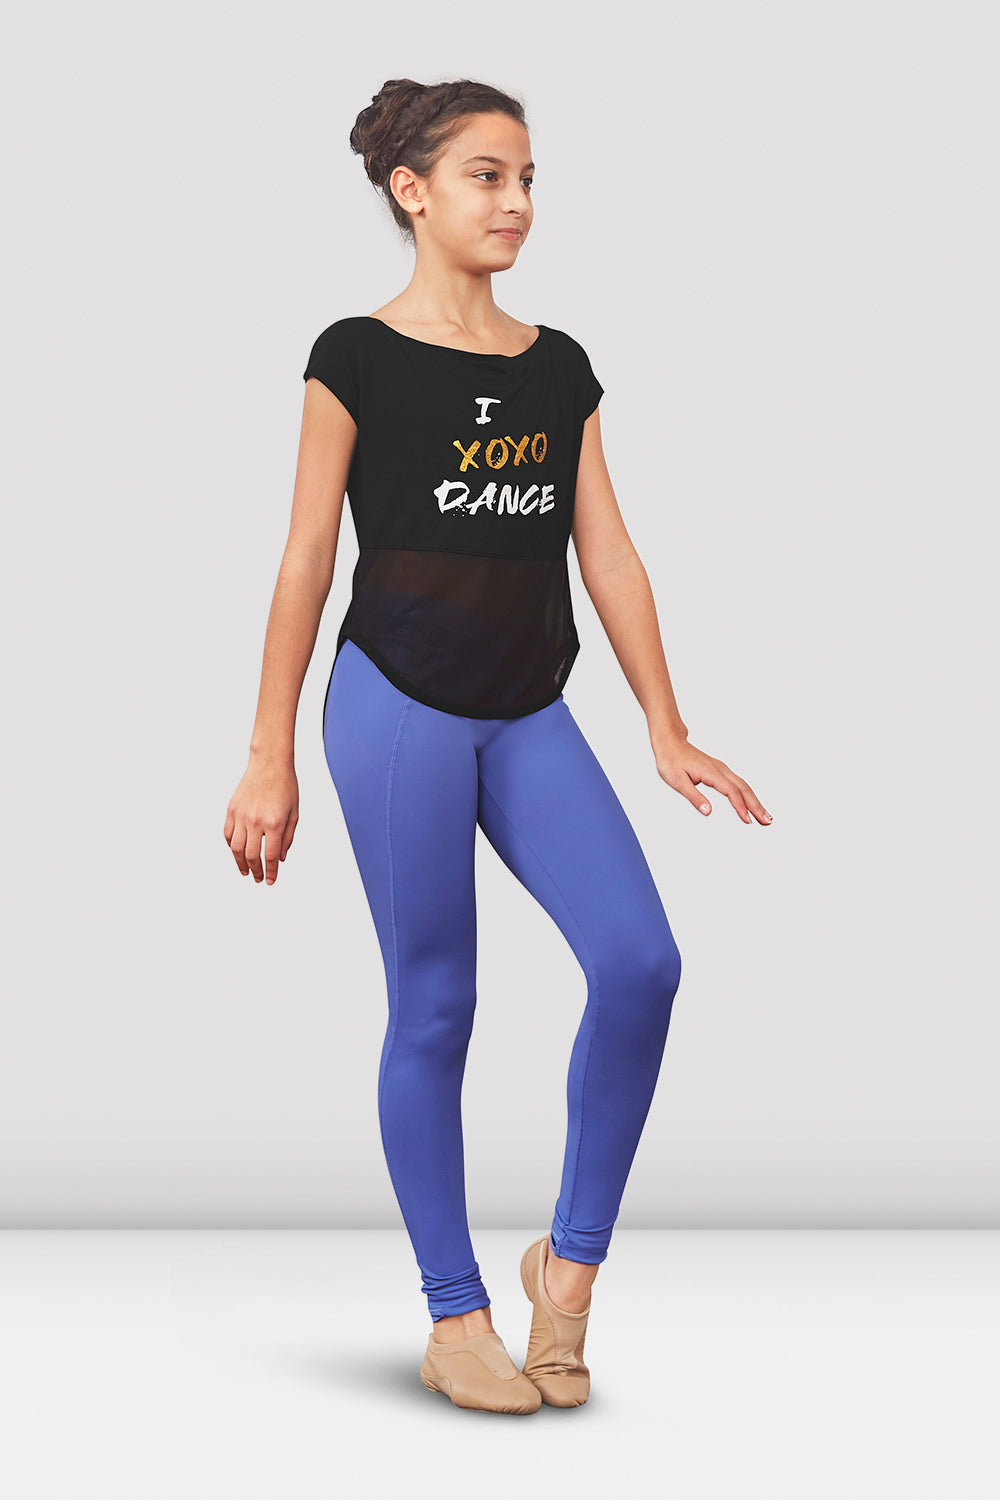 A young female ballet dancer wearing girls Renae tie back t-shirt with stirrup leggings in Iris